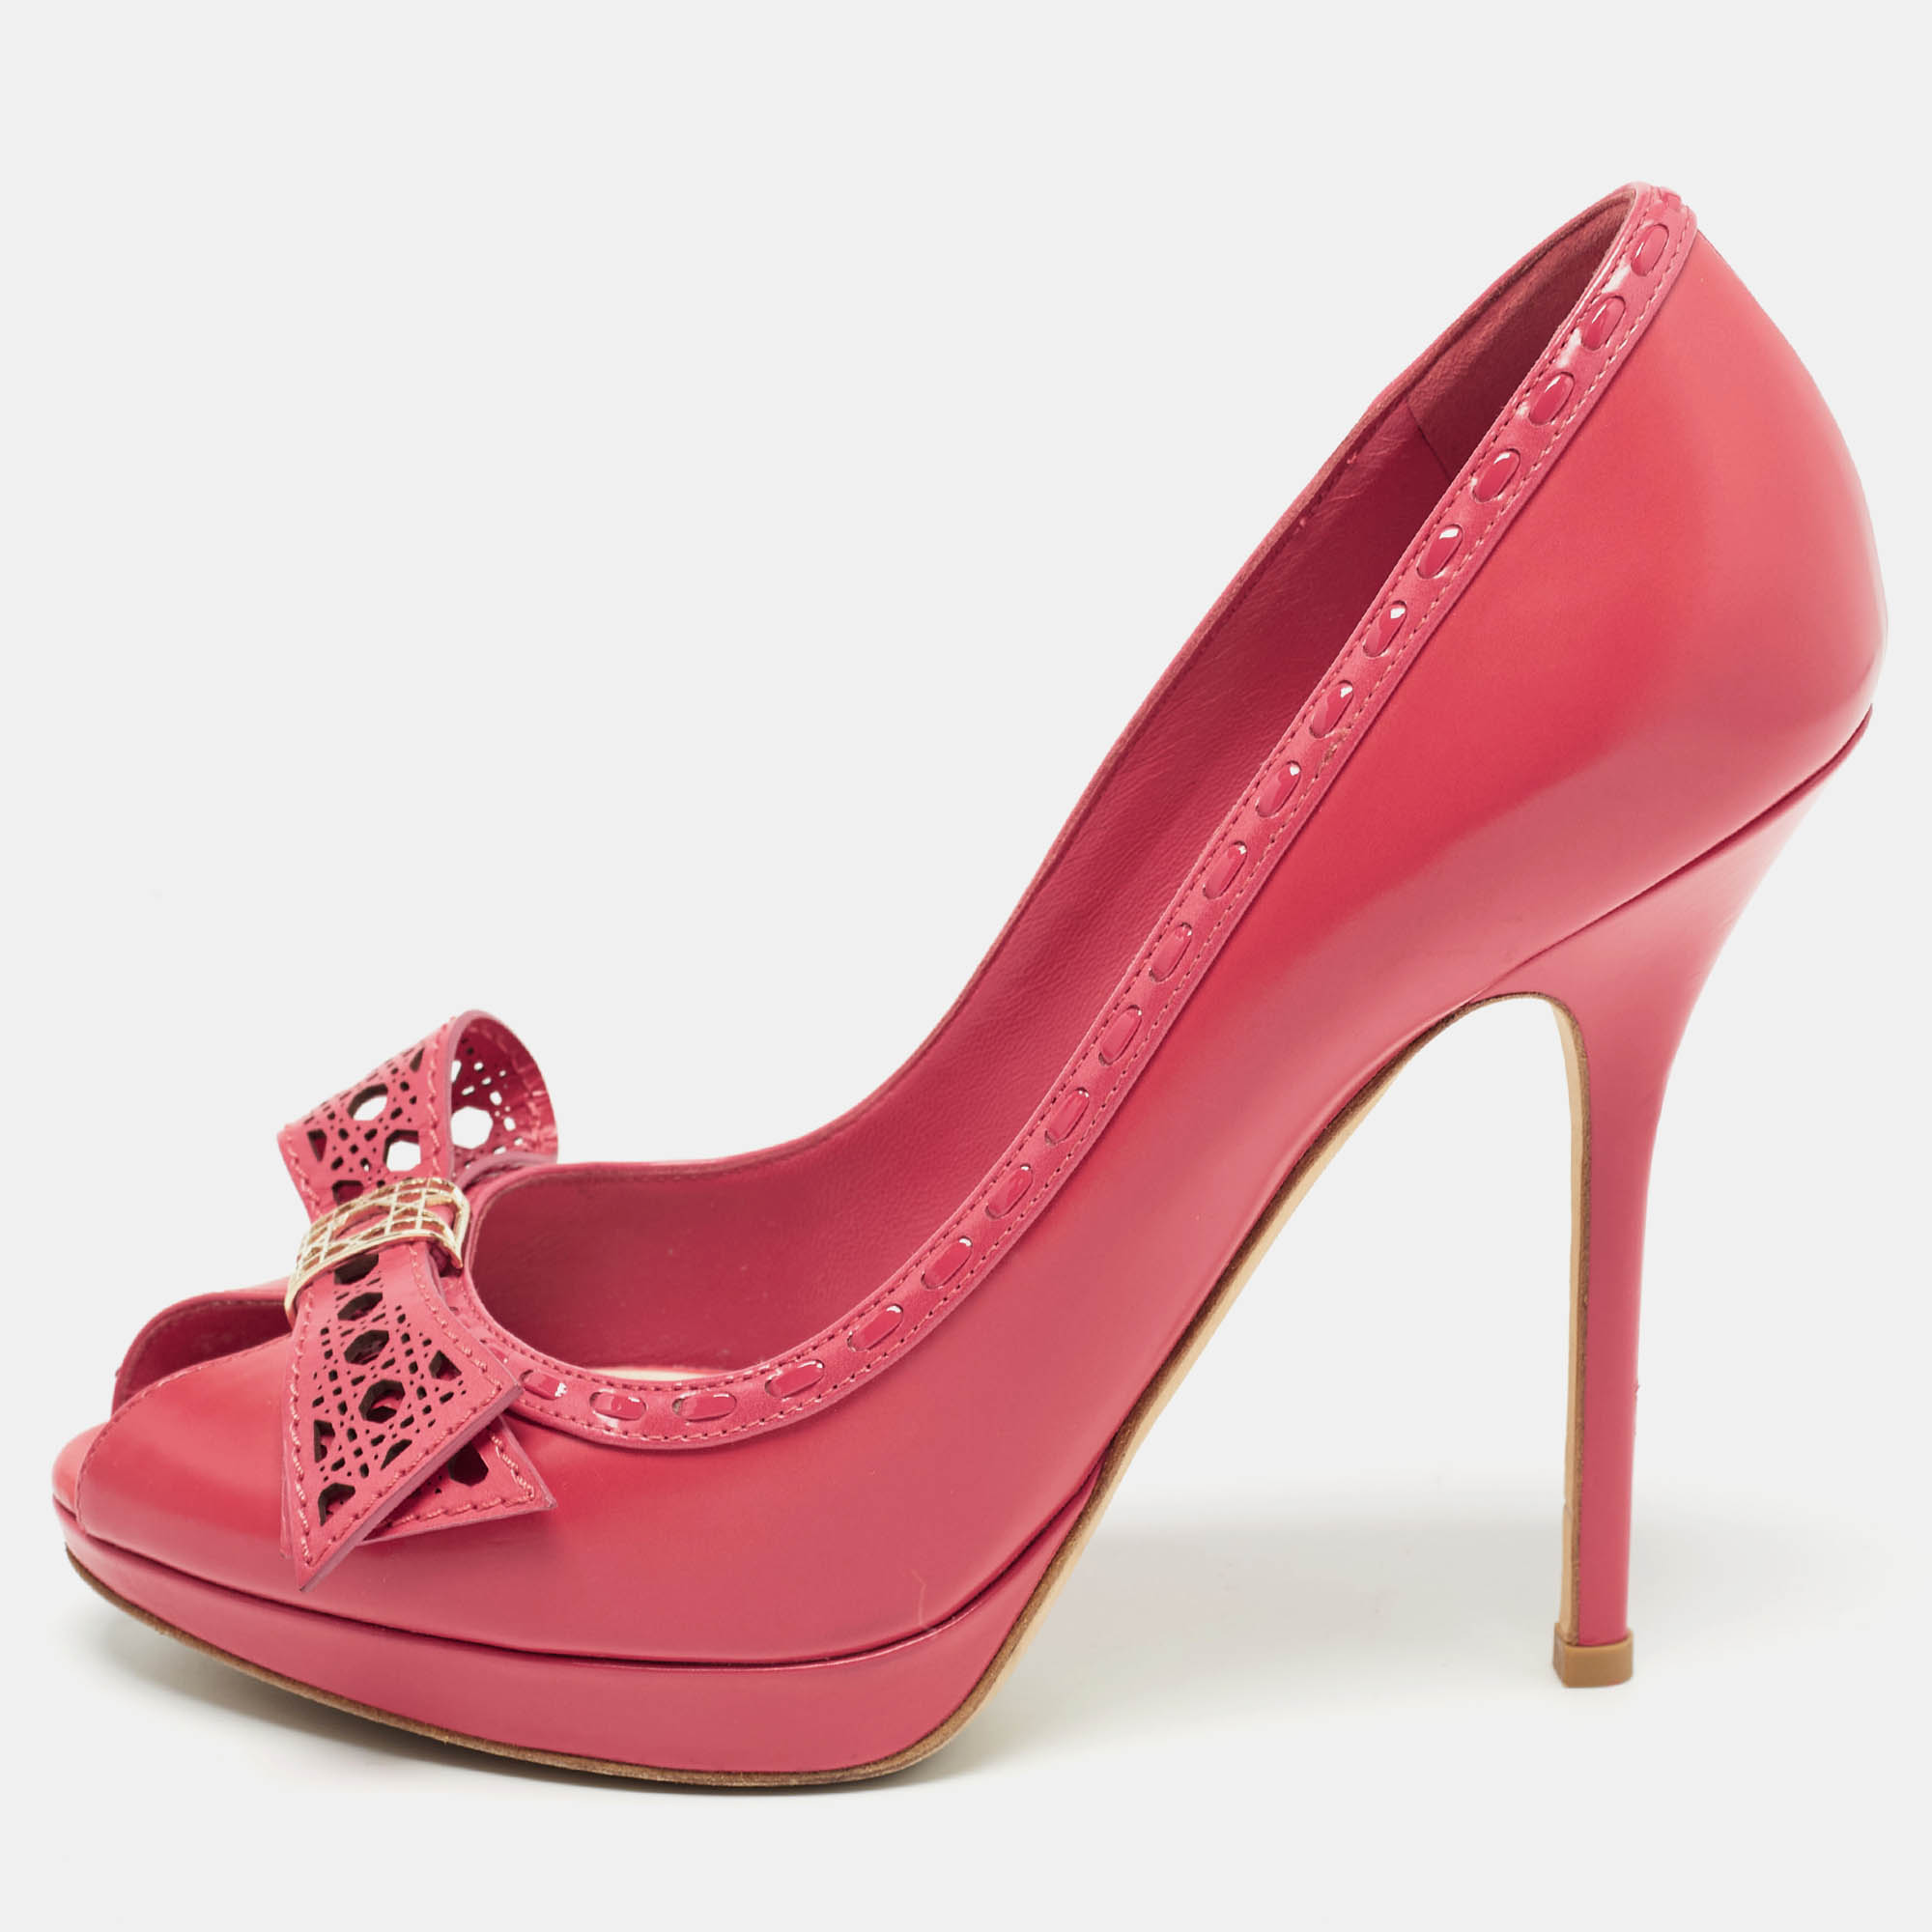 Add these Dior beauties to your closet today and flaunt them with all your outfits. They have been crafted from pink leather and come with a Cannage detailed bow detail in the front. The peep toe pumps comes made from leather and are complete with stiletto heels.